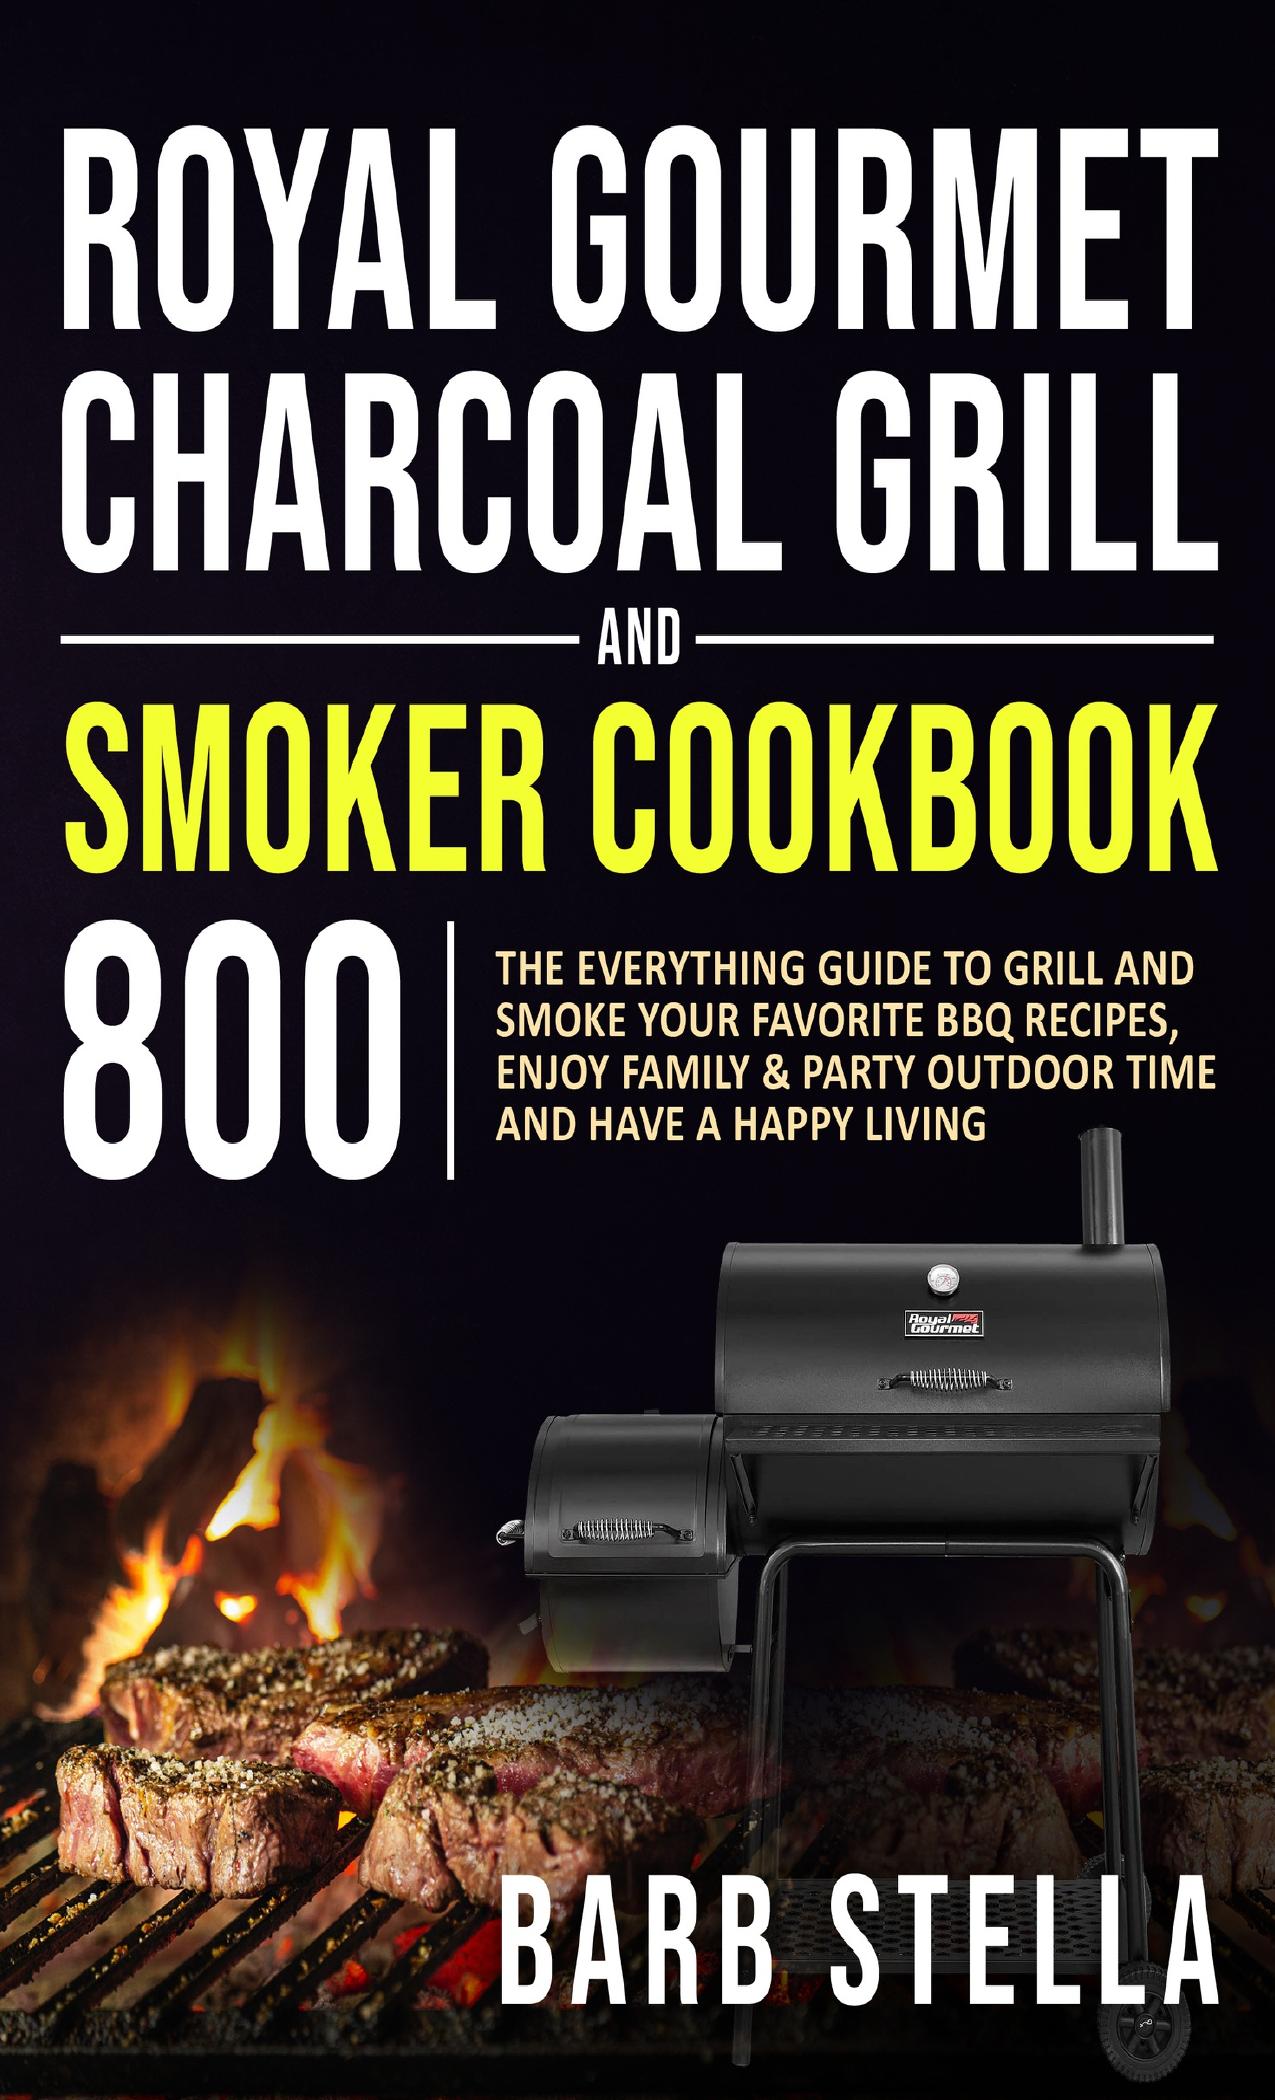 Royal Gourmet Charcoal Grill&Smoker Cookbook 800: The Everything Guide to Grill and Smoke Your Favorite BBQ Recipes, Enjoy Family&Party Outdoor Time and Have A Happy Living by Stella Barb